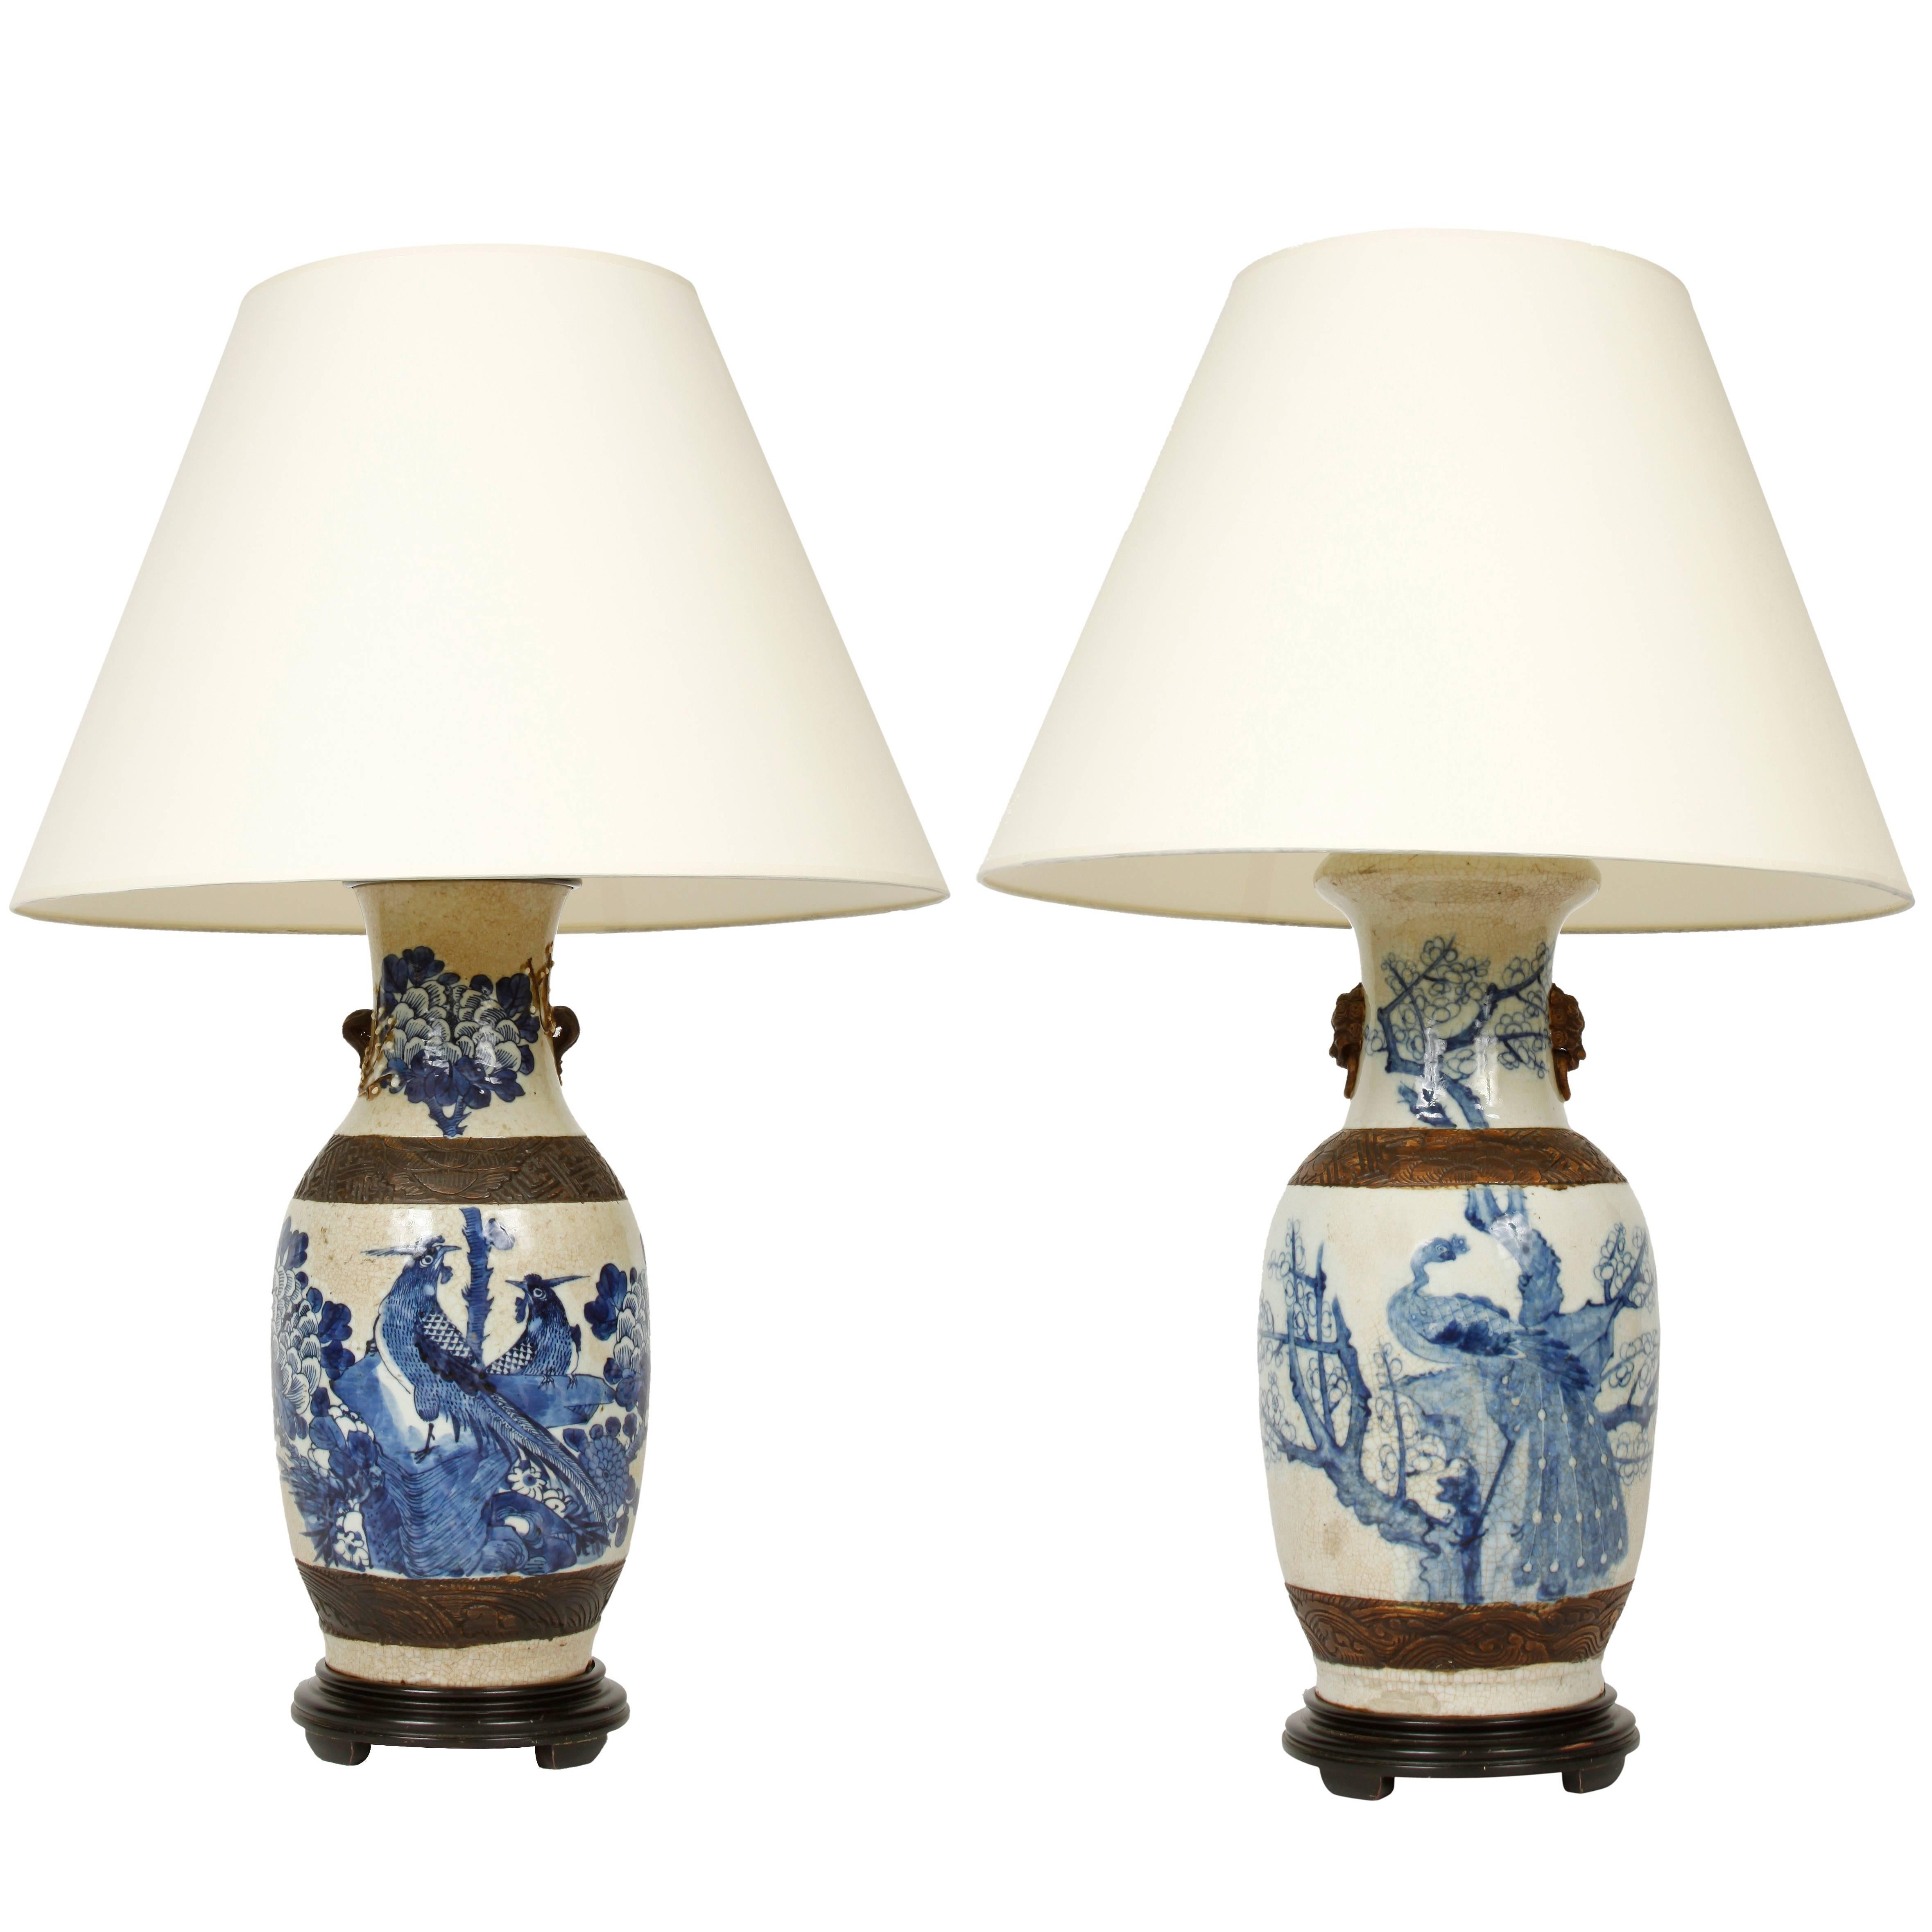 Pair of Vintage Chinese Export Lamps